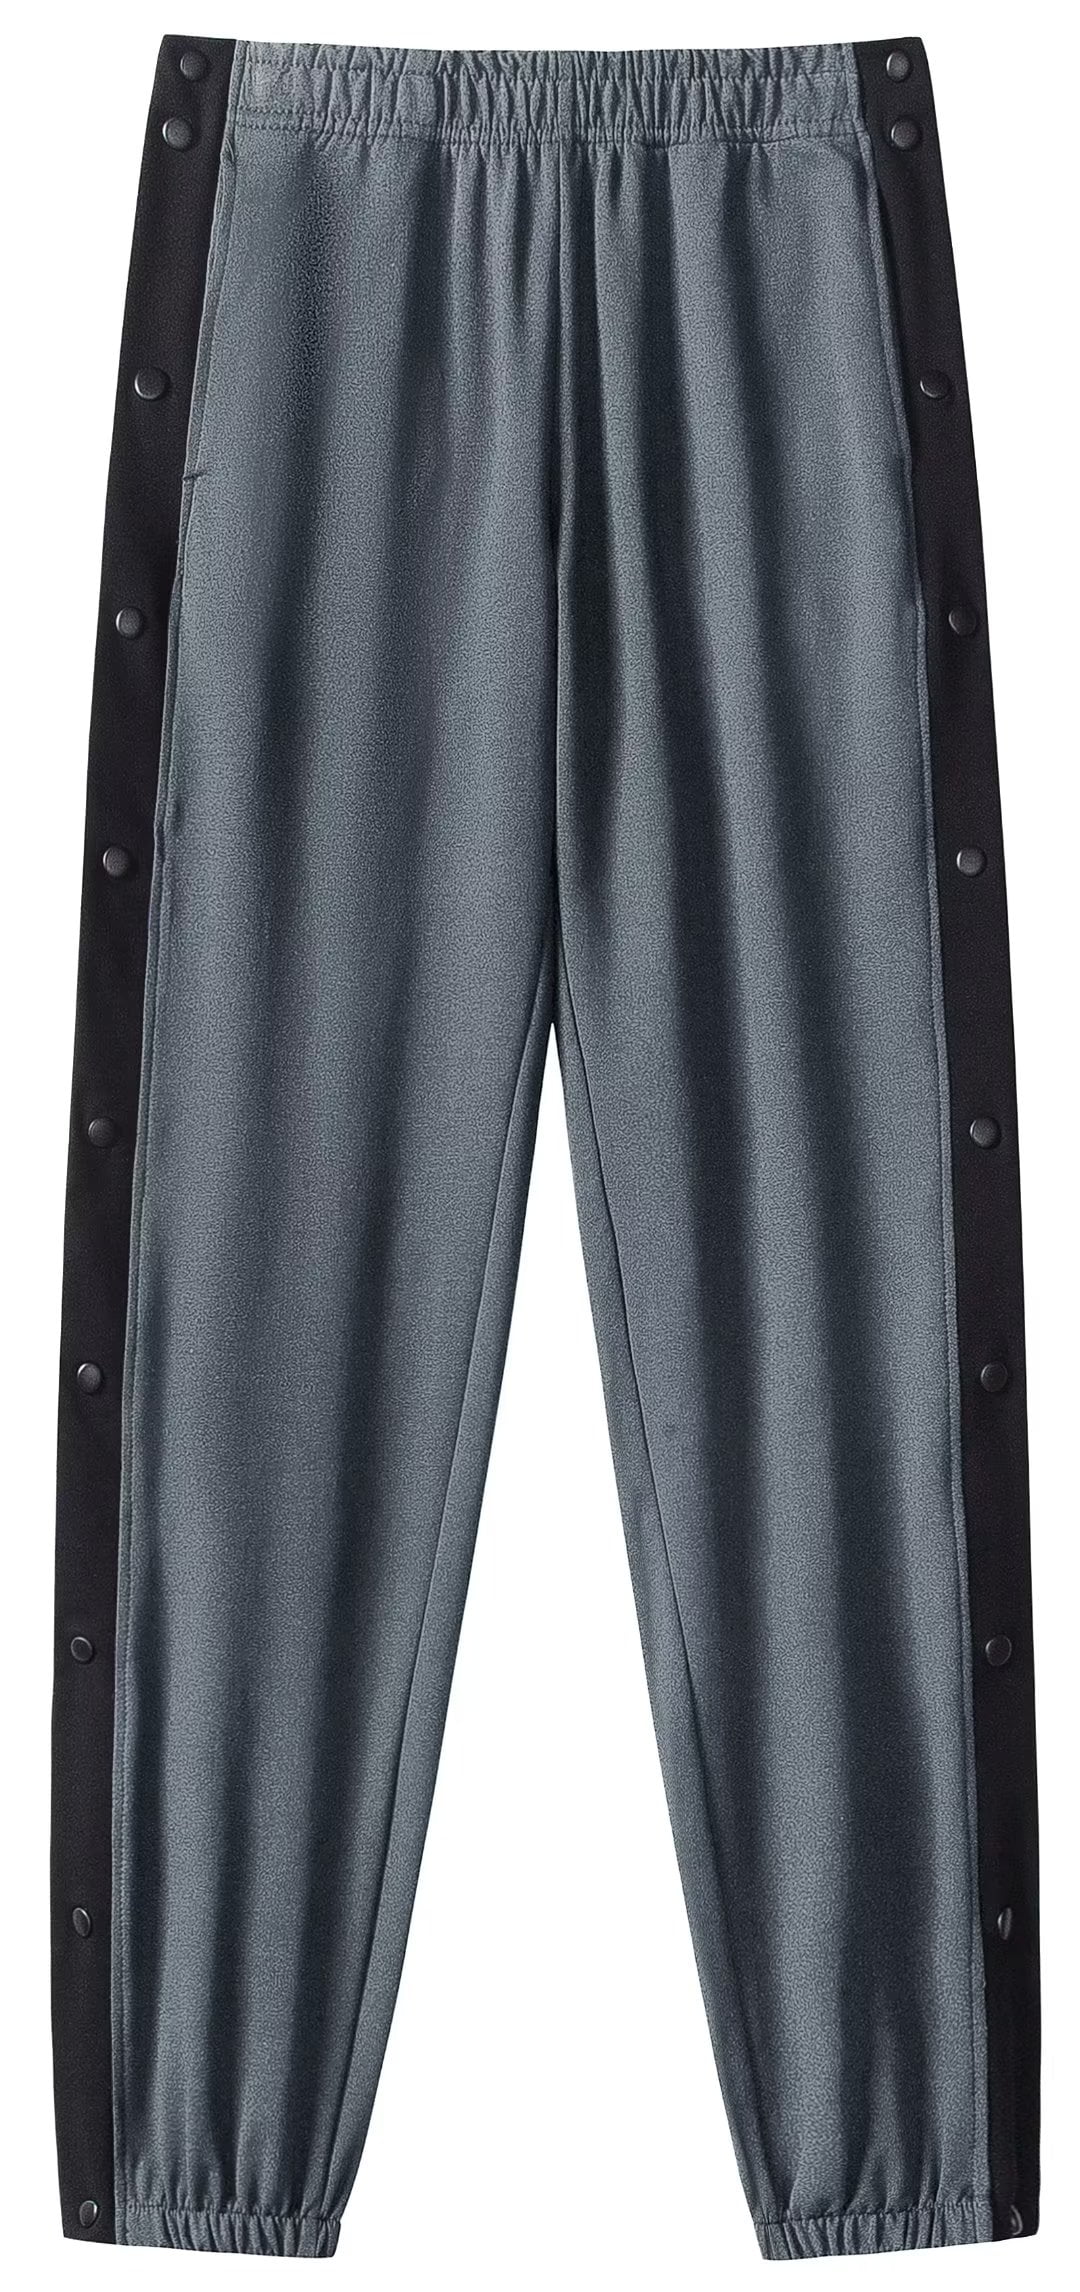 Chrisuno Men's Tear Away Pants For Post Surgery Basketball Loost Fit ...